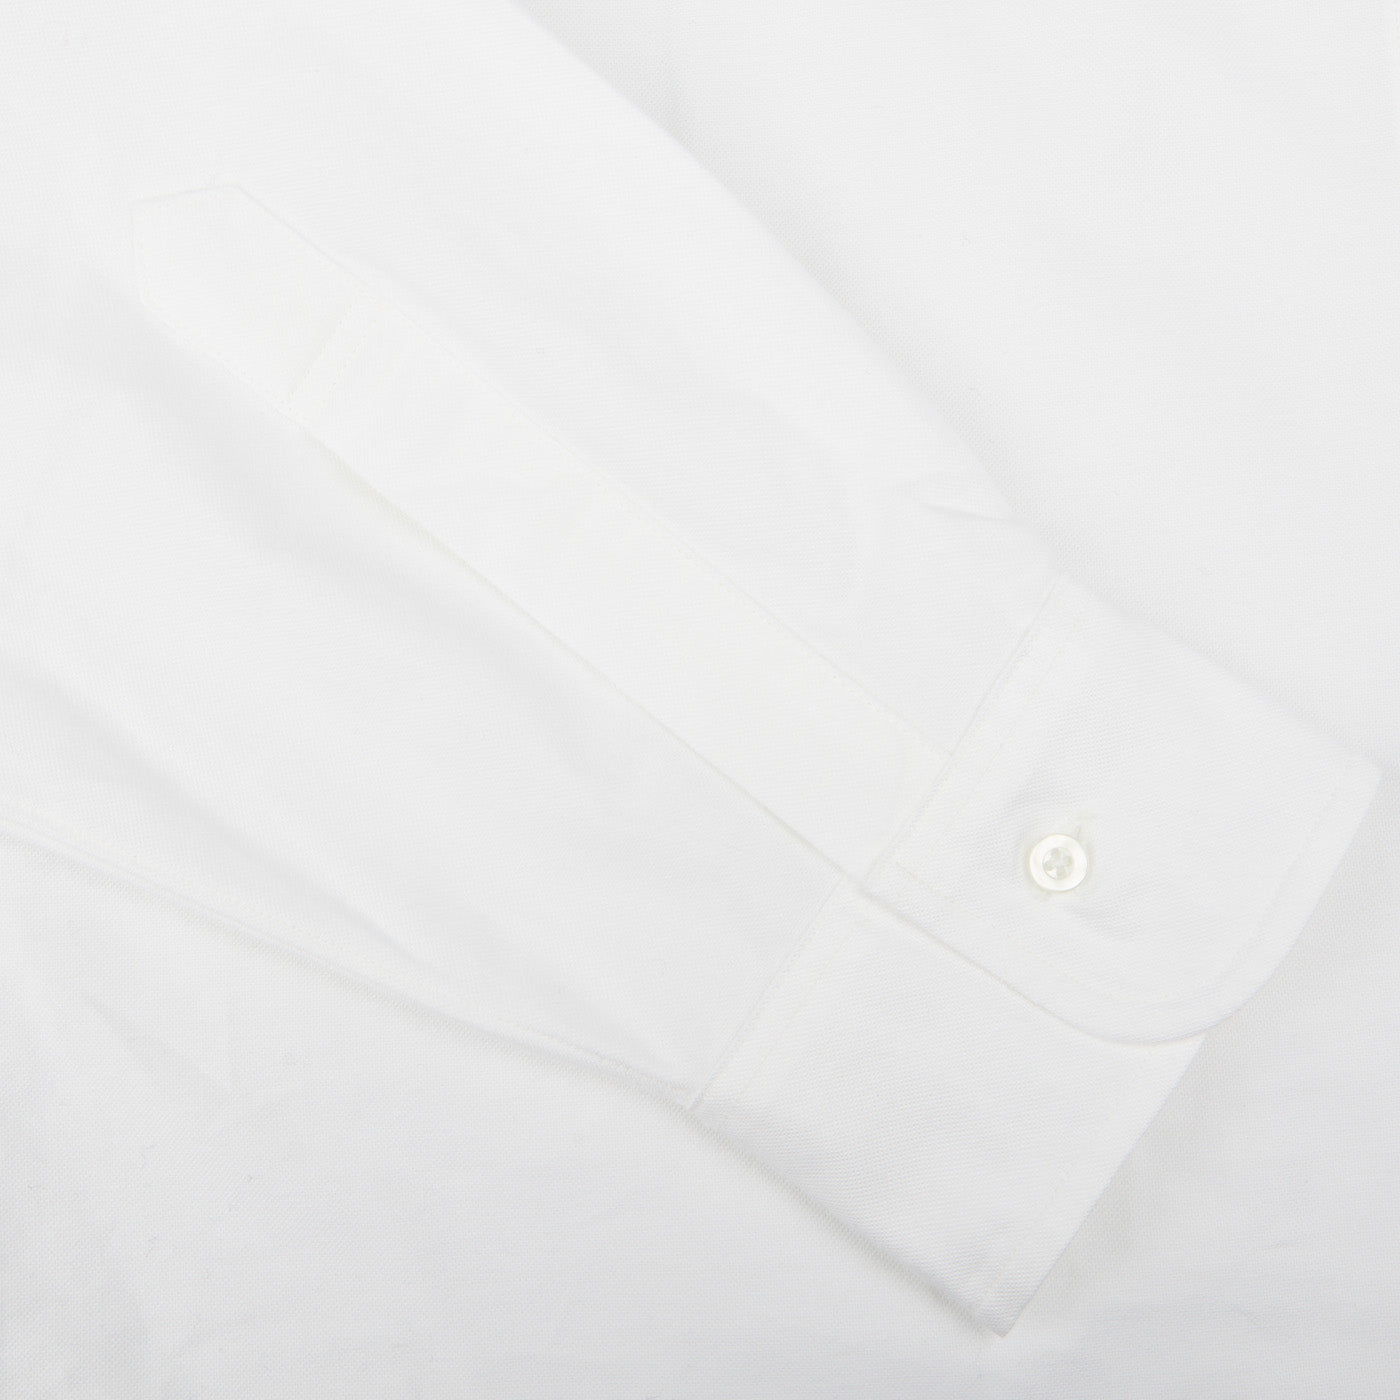 A close up image of a Far East Manufacturing White Cotton Oxford BD Regular Shirt.